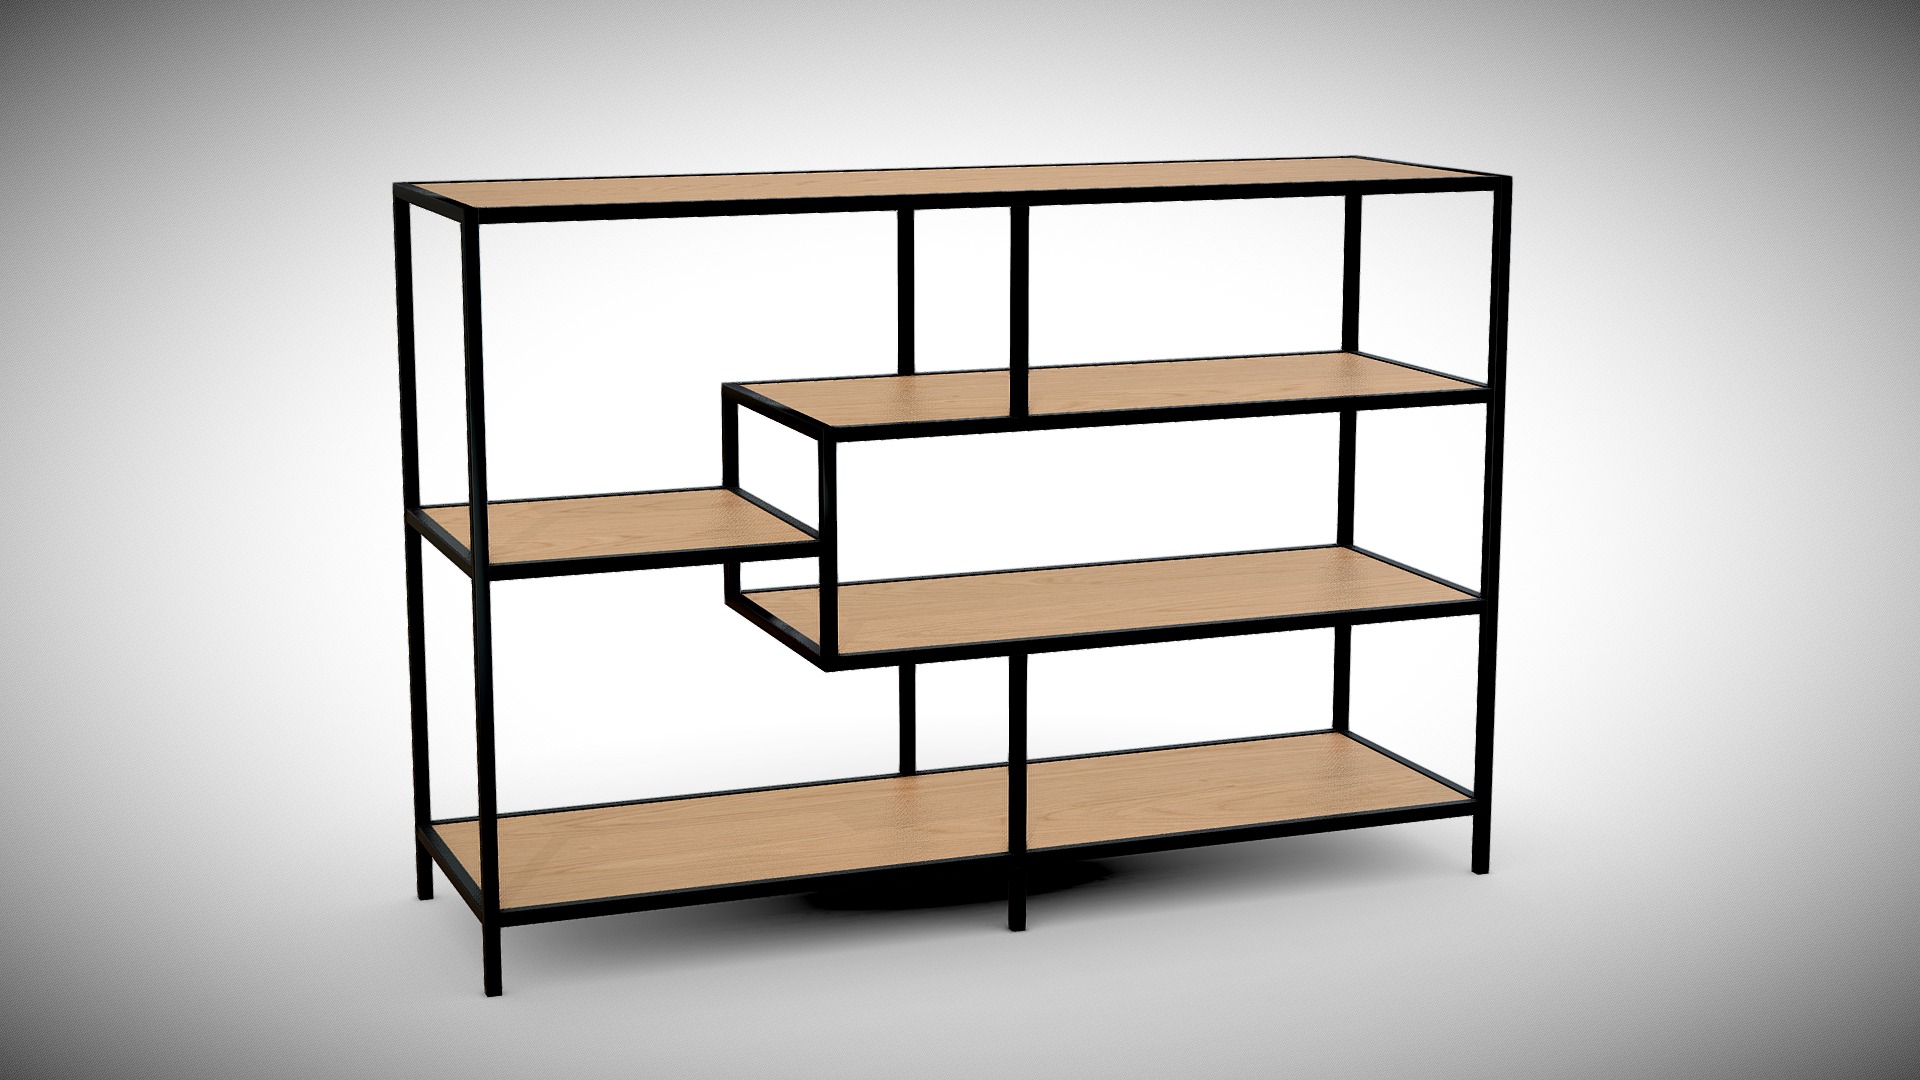 3D model JEREMY shelf - This is a 3D model of the JEREMY shelf. The 3D model is about a wooden shelf with a metal frame.